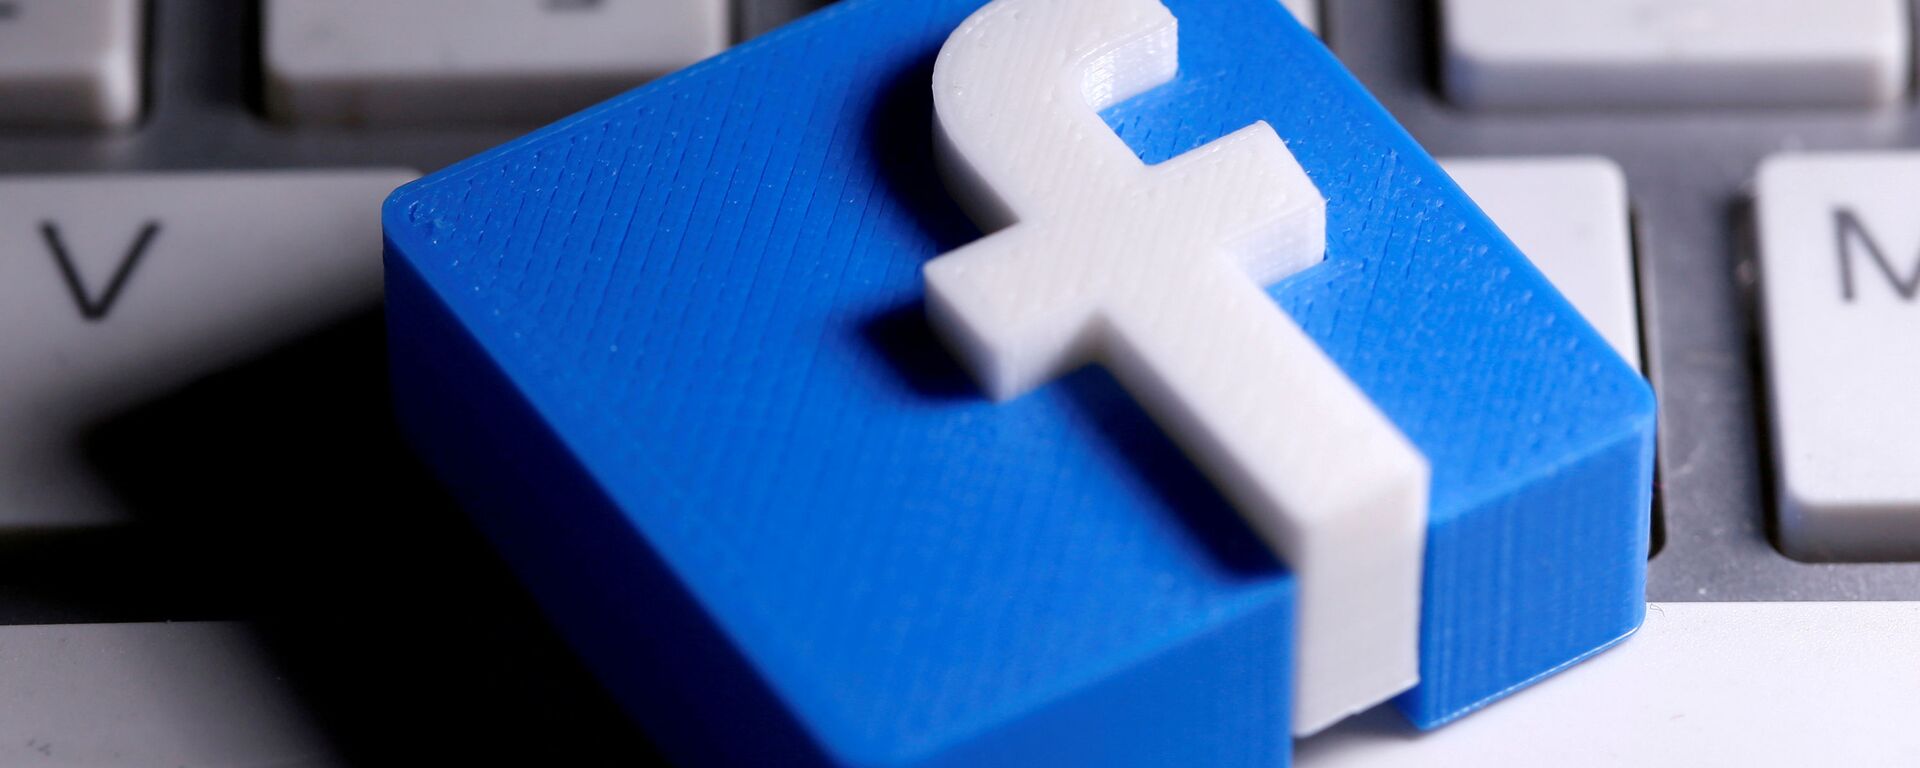 A 3D-printed Facebook logo is seen placed on a keyboard in this illustration taken March 25, 2020.  - Sputnik International, 1920, 05.05.2021